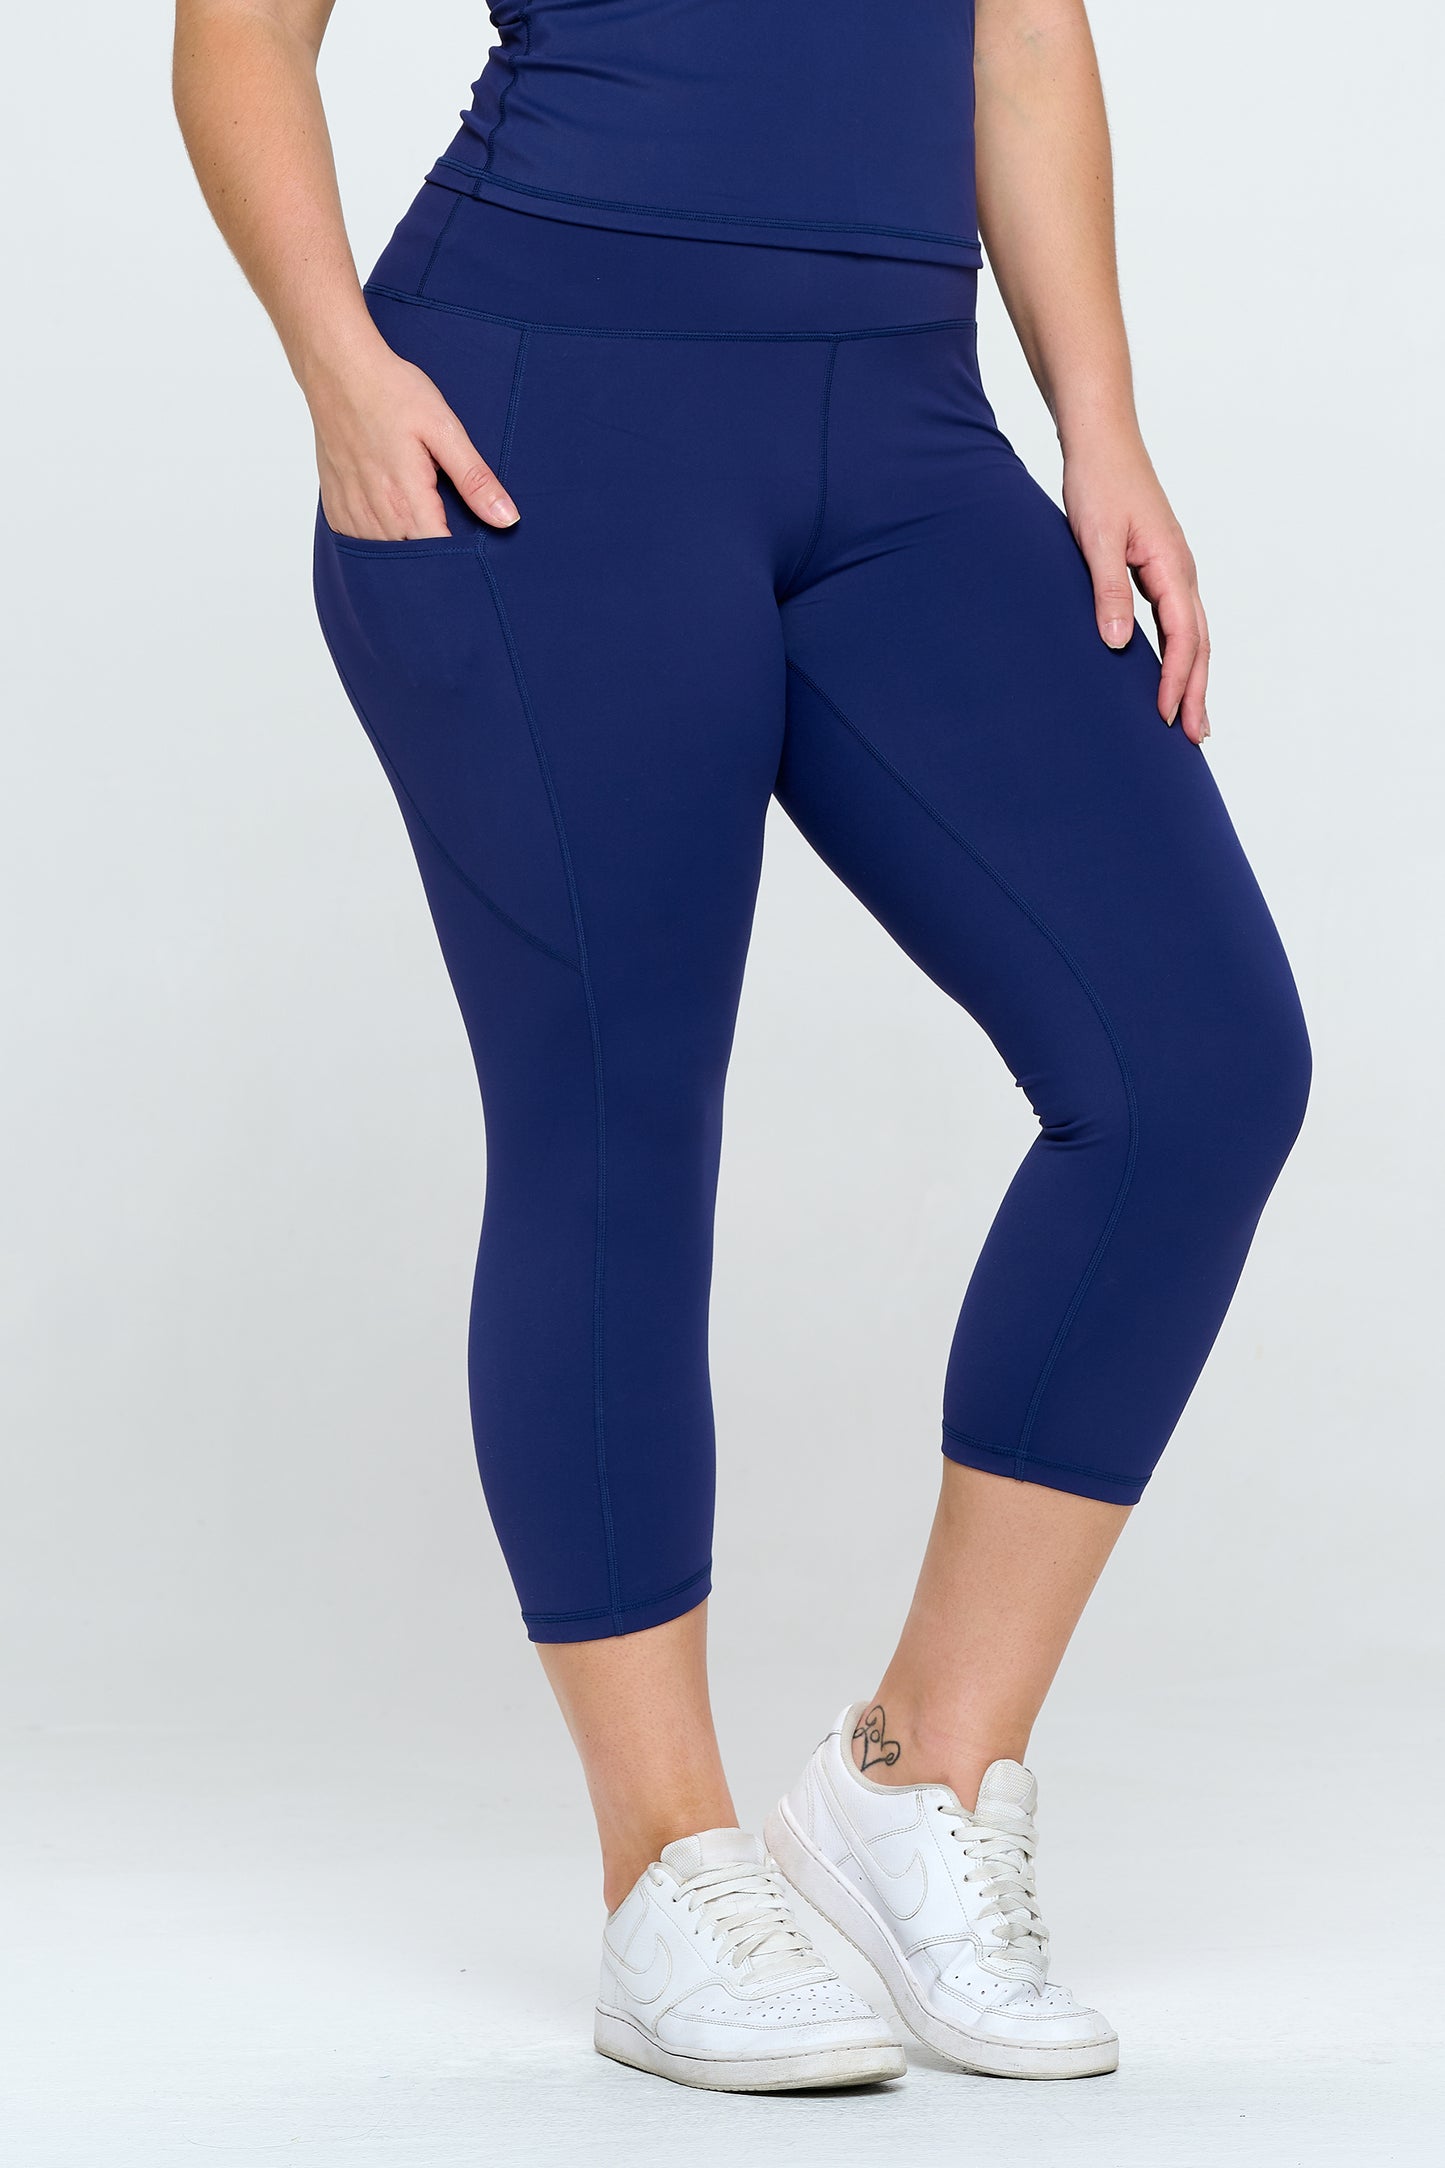 Buttery Soft High Waisted Capri Leggings with Pockets - Navy Blue